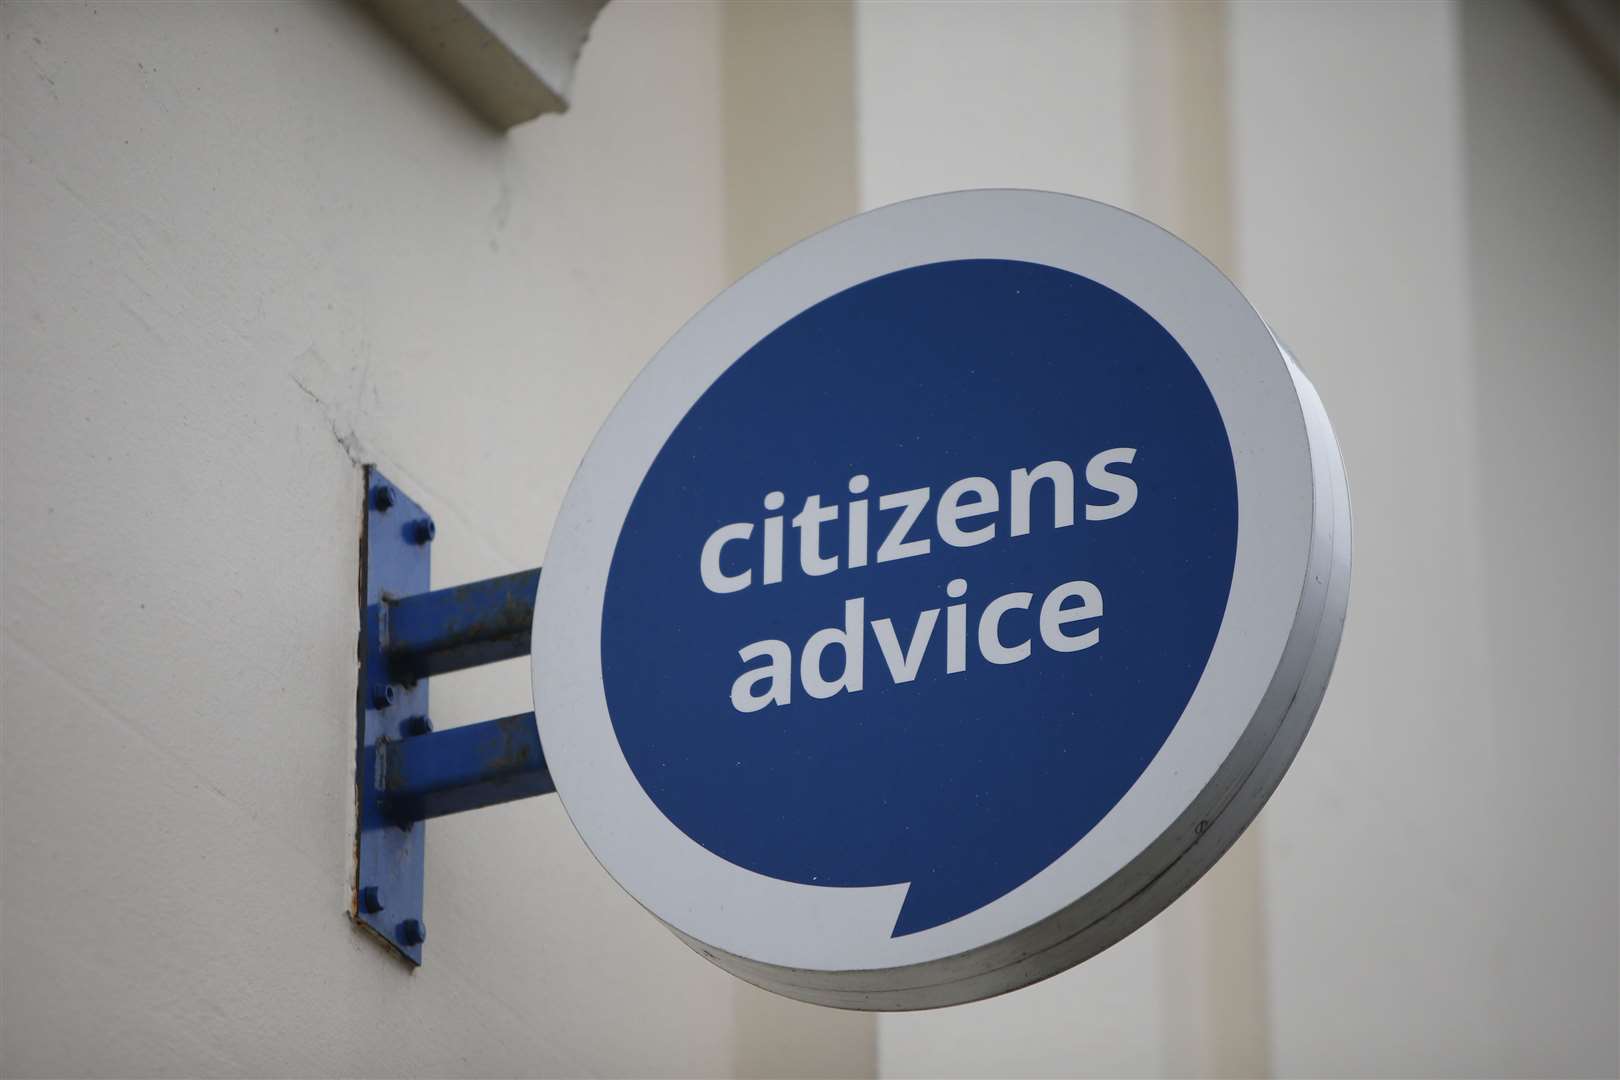 Citizens Advice is a national charity Picture: Andy Jones